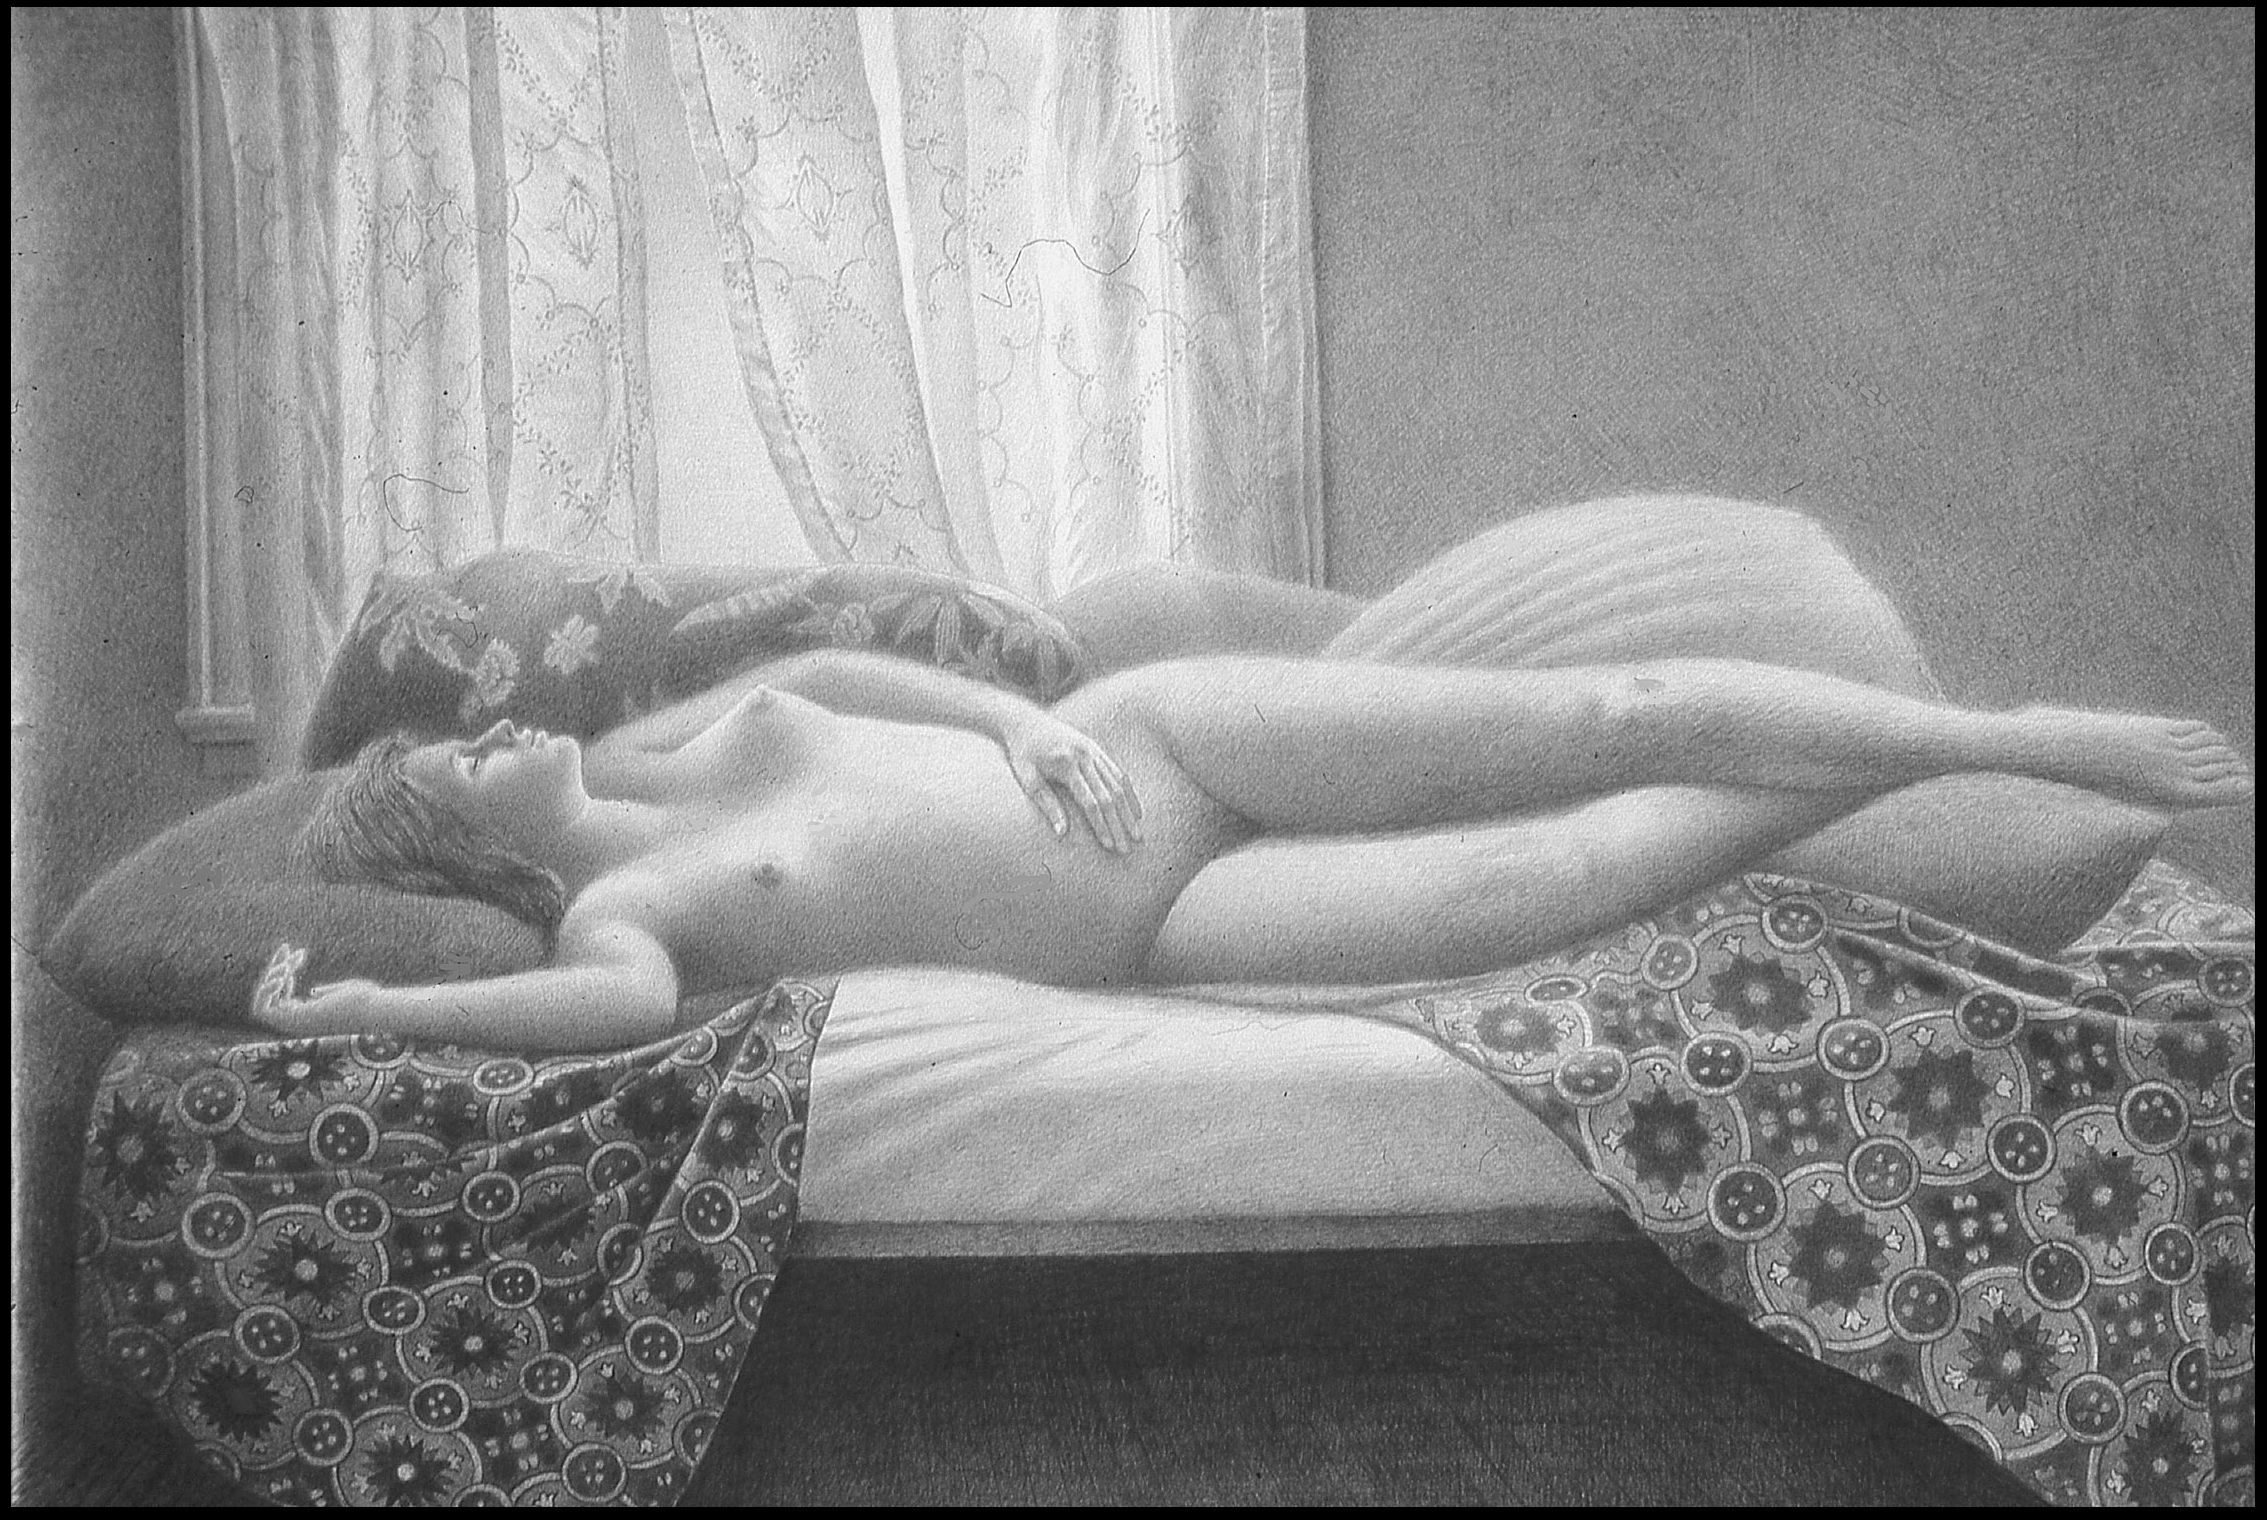  Nude with Patterned Cloth (22"x30") Graphite on Rives 